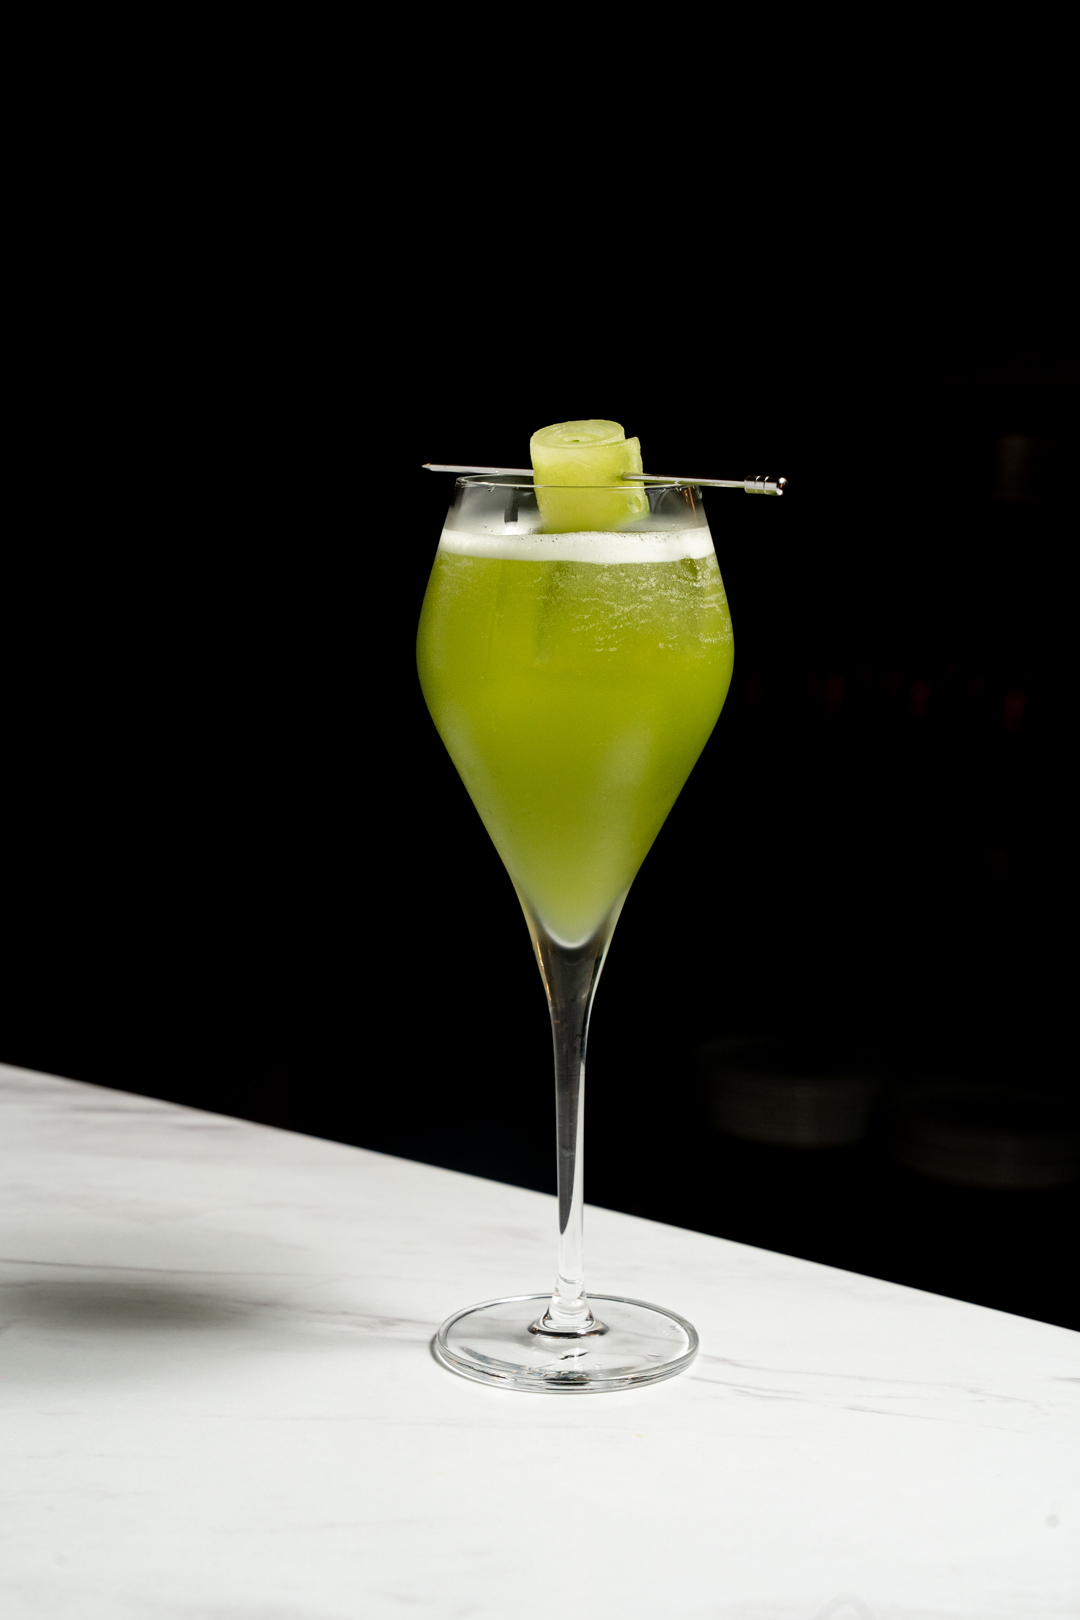 Cucumber salad: Cucumber, lemon, makrut lime, and Tanqueray gin